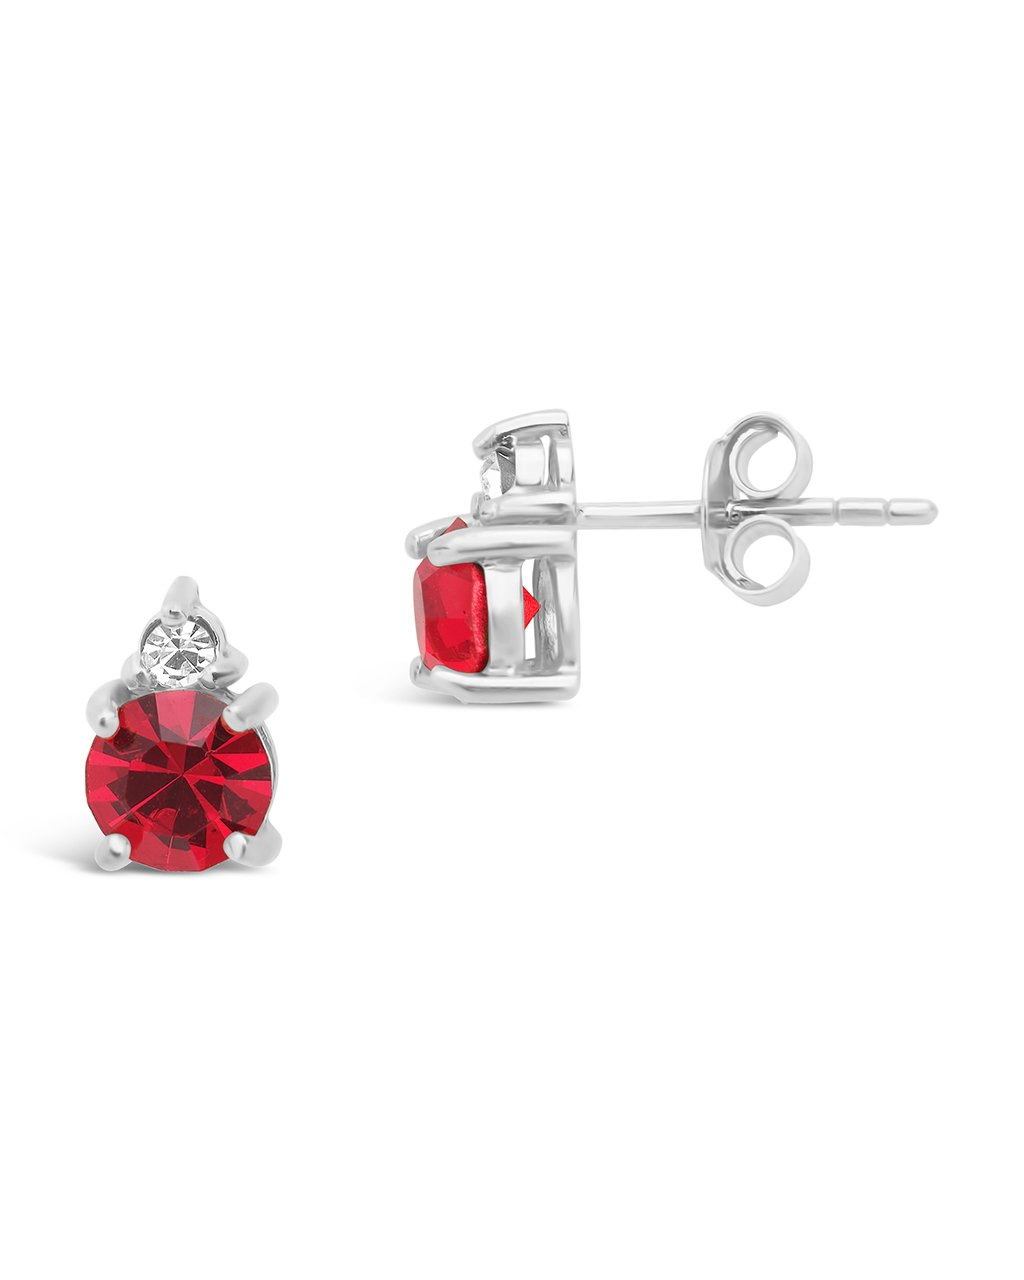 Sterling Silver Birthstone Studs Earring Sterling Forever Silver July / Ruby 